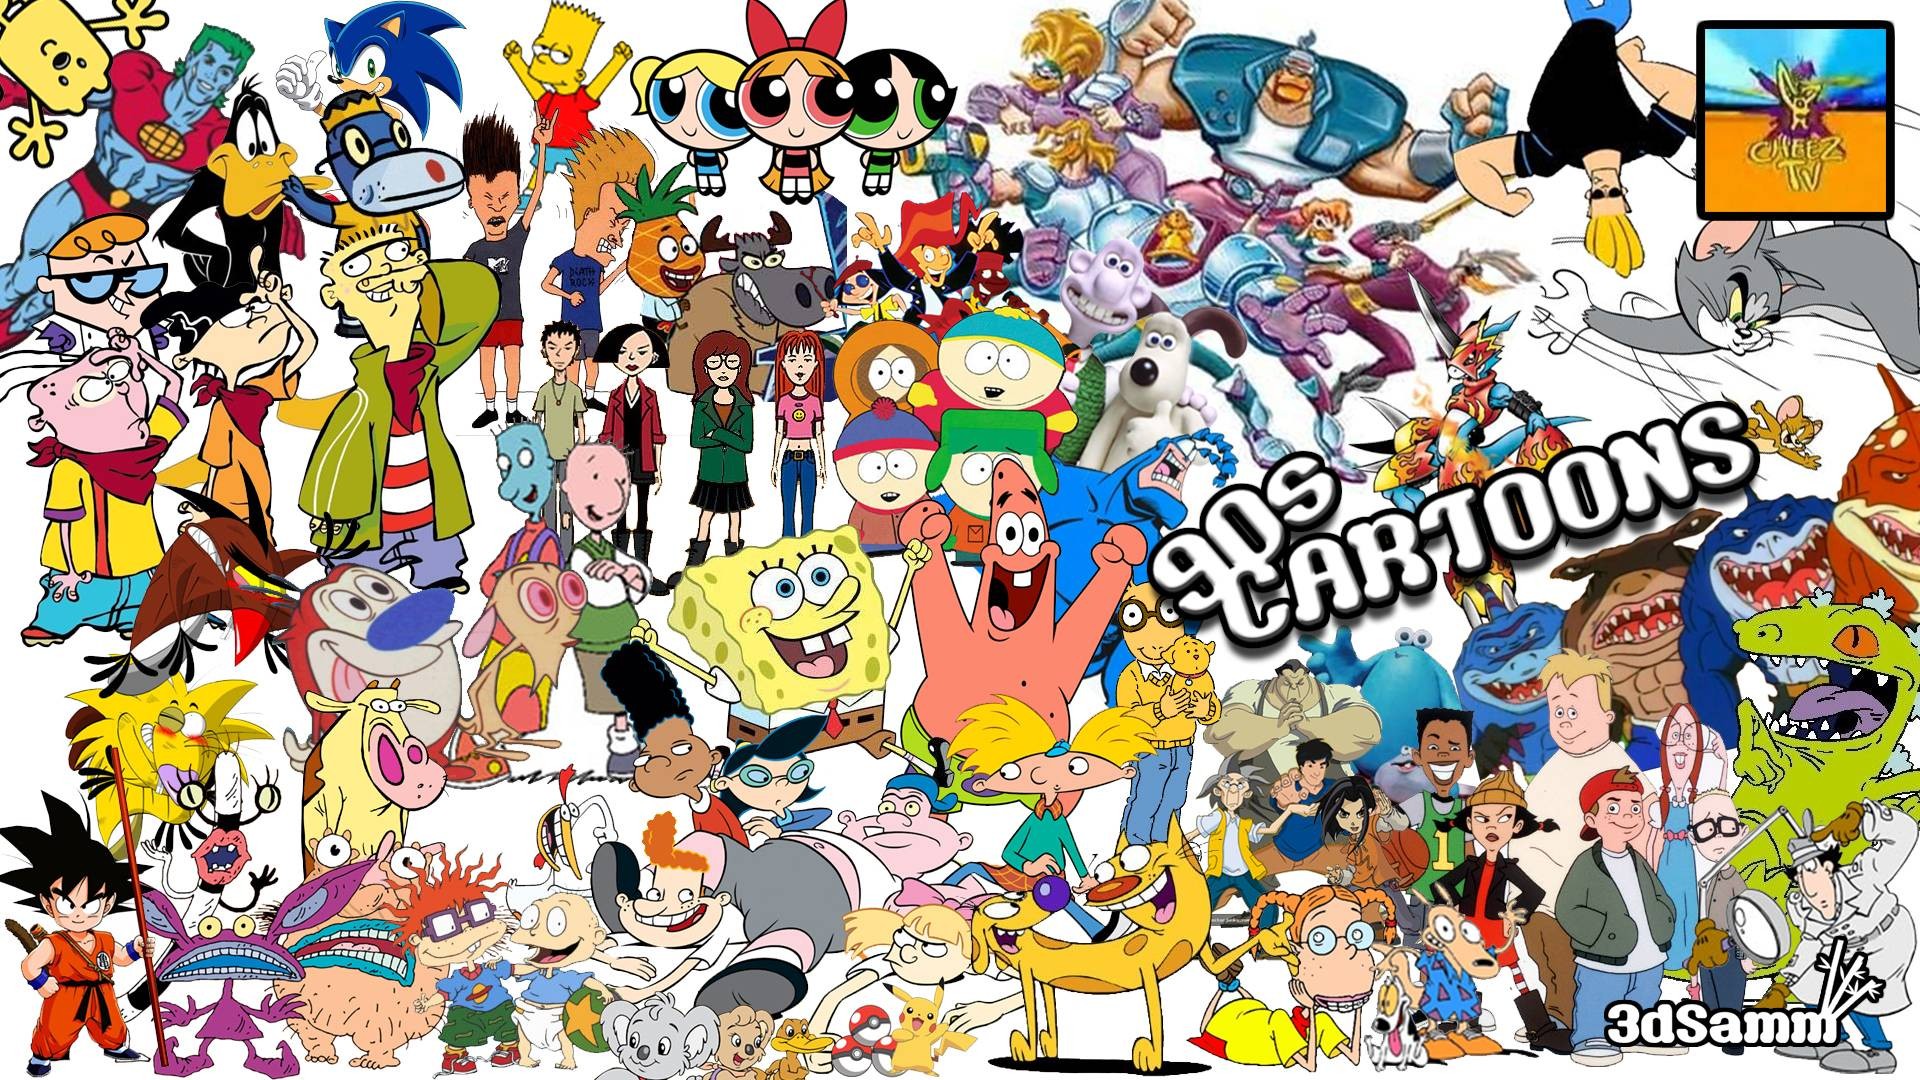 General 1920x1080 cartoon 1990s animated series TV series SpongeBob SquarePants The Simpsons Beavis & Butthead Daffy Duck South Park Wallace and Gromit Tom and Jerry Inspector Gadget Son Goku Sonic the Hedgehog digital art